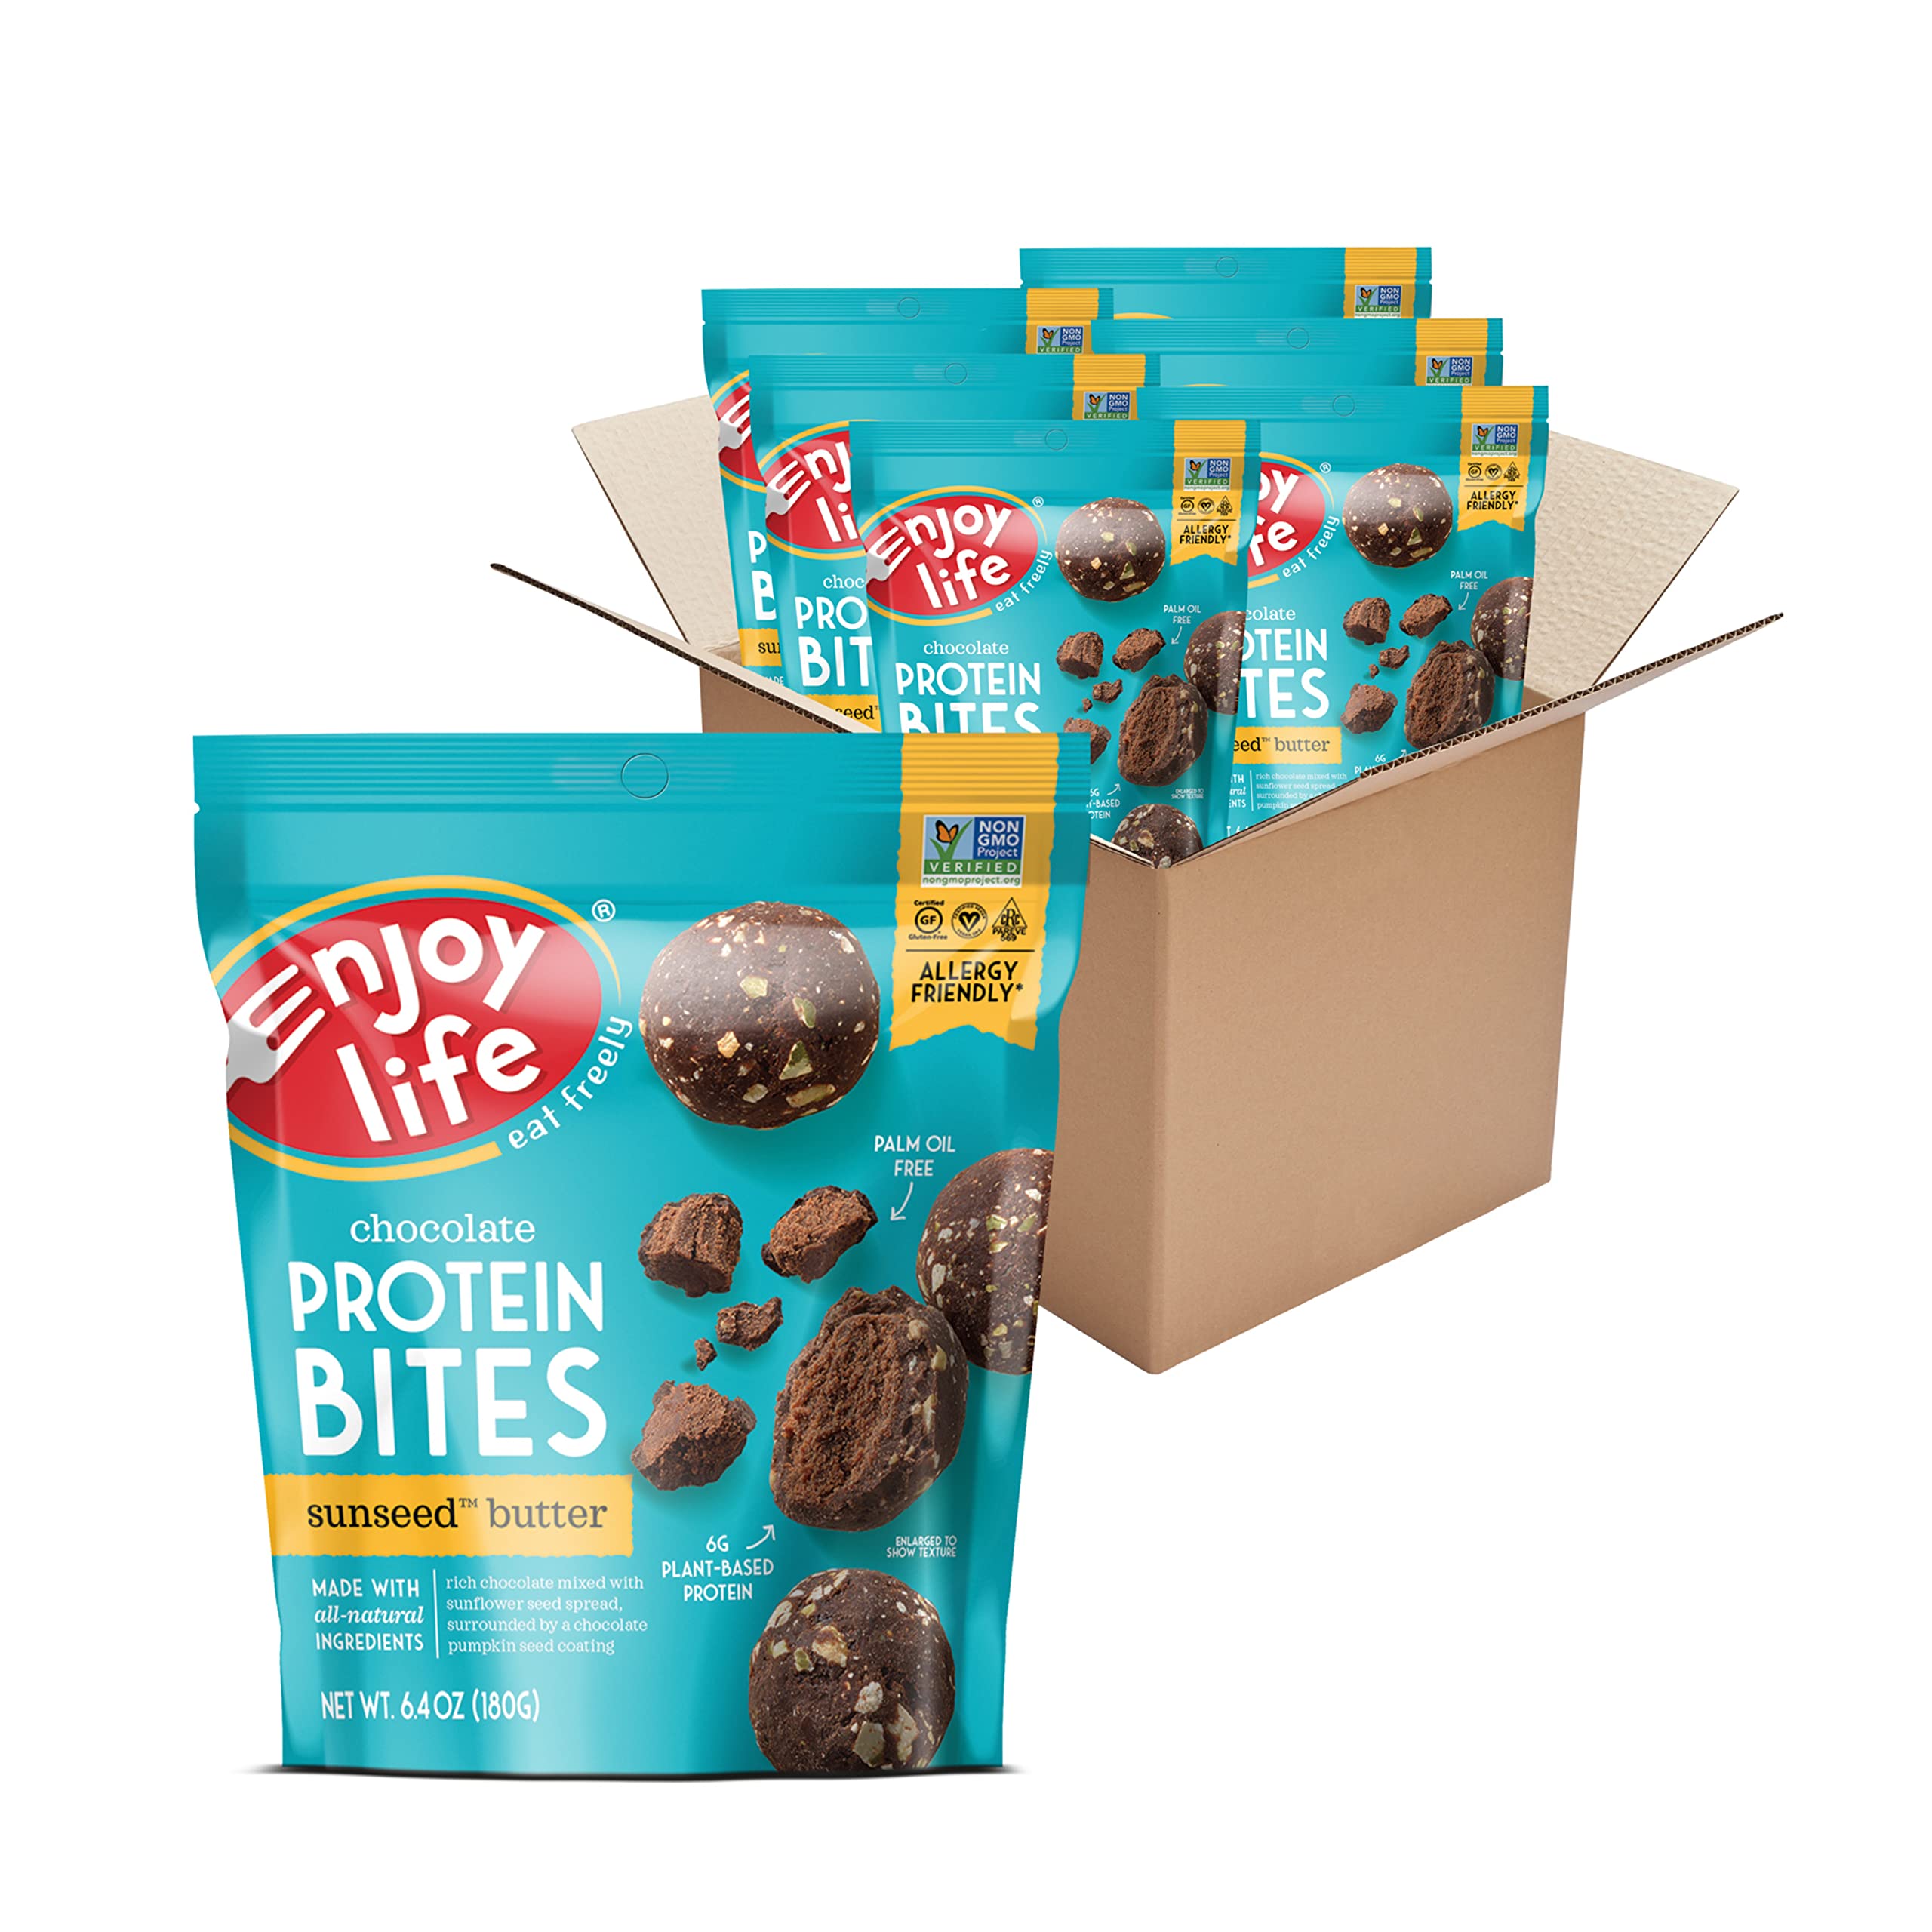 6-Pack 6.4-Oz Enjoy Life Enjoy Bites SunSeed Butter Chocolate Protein Bites $29.64 ($4.94 each) + Free Shipping